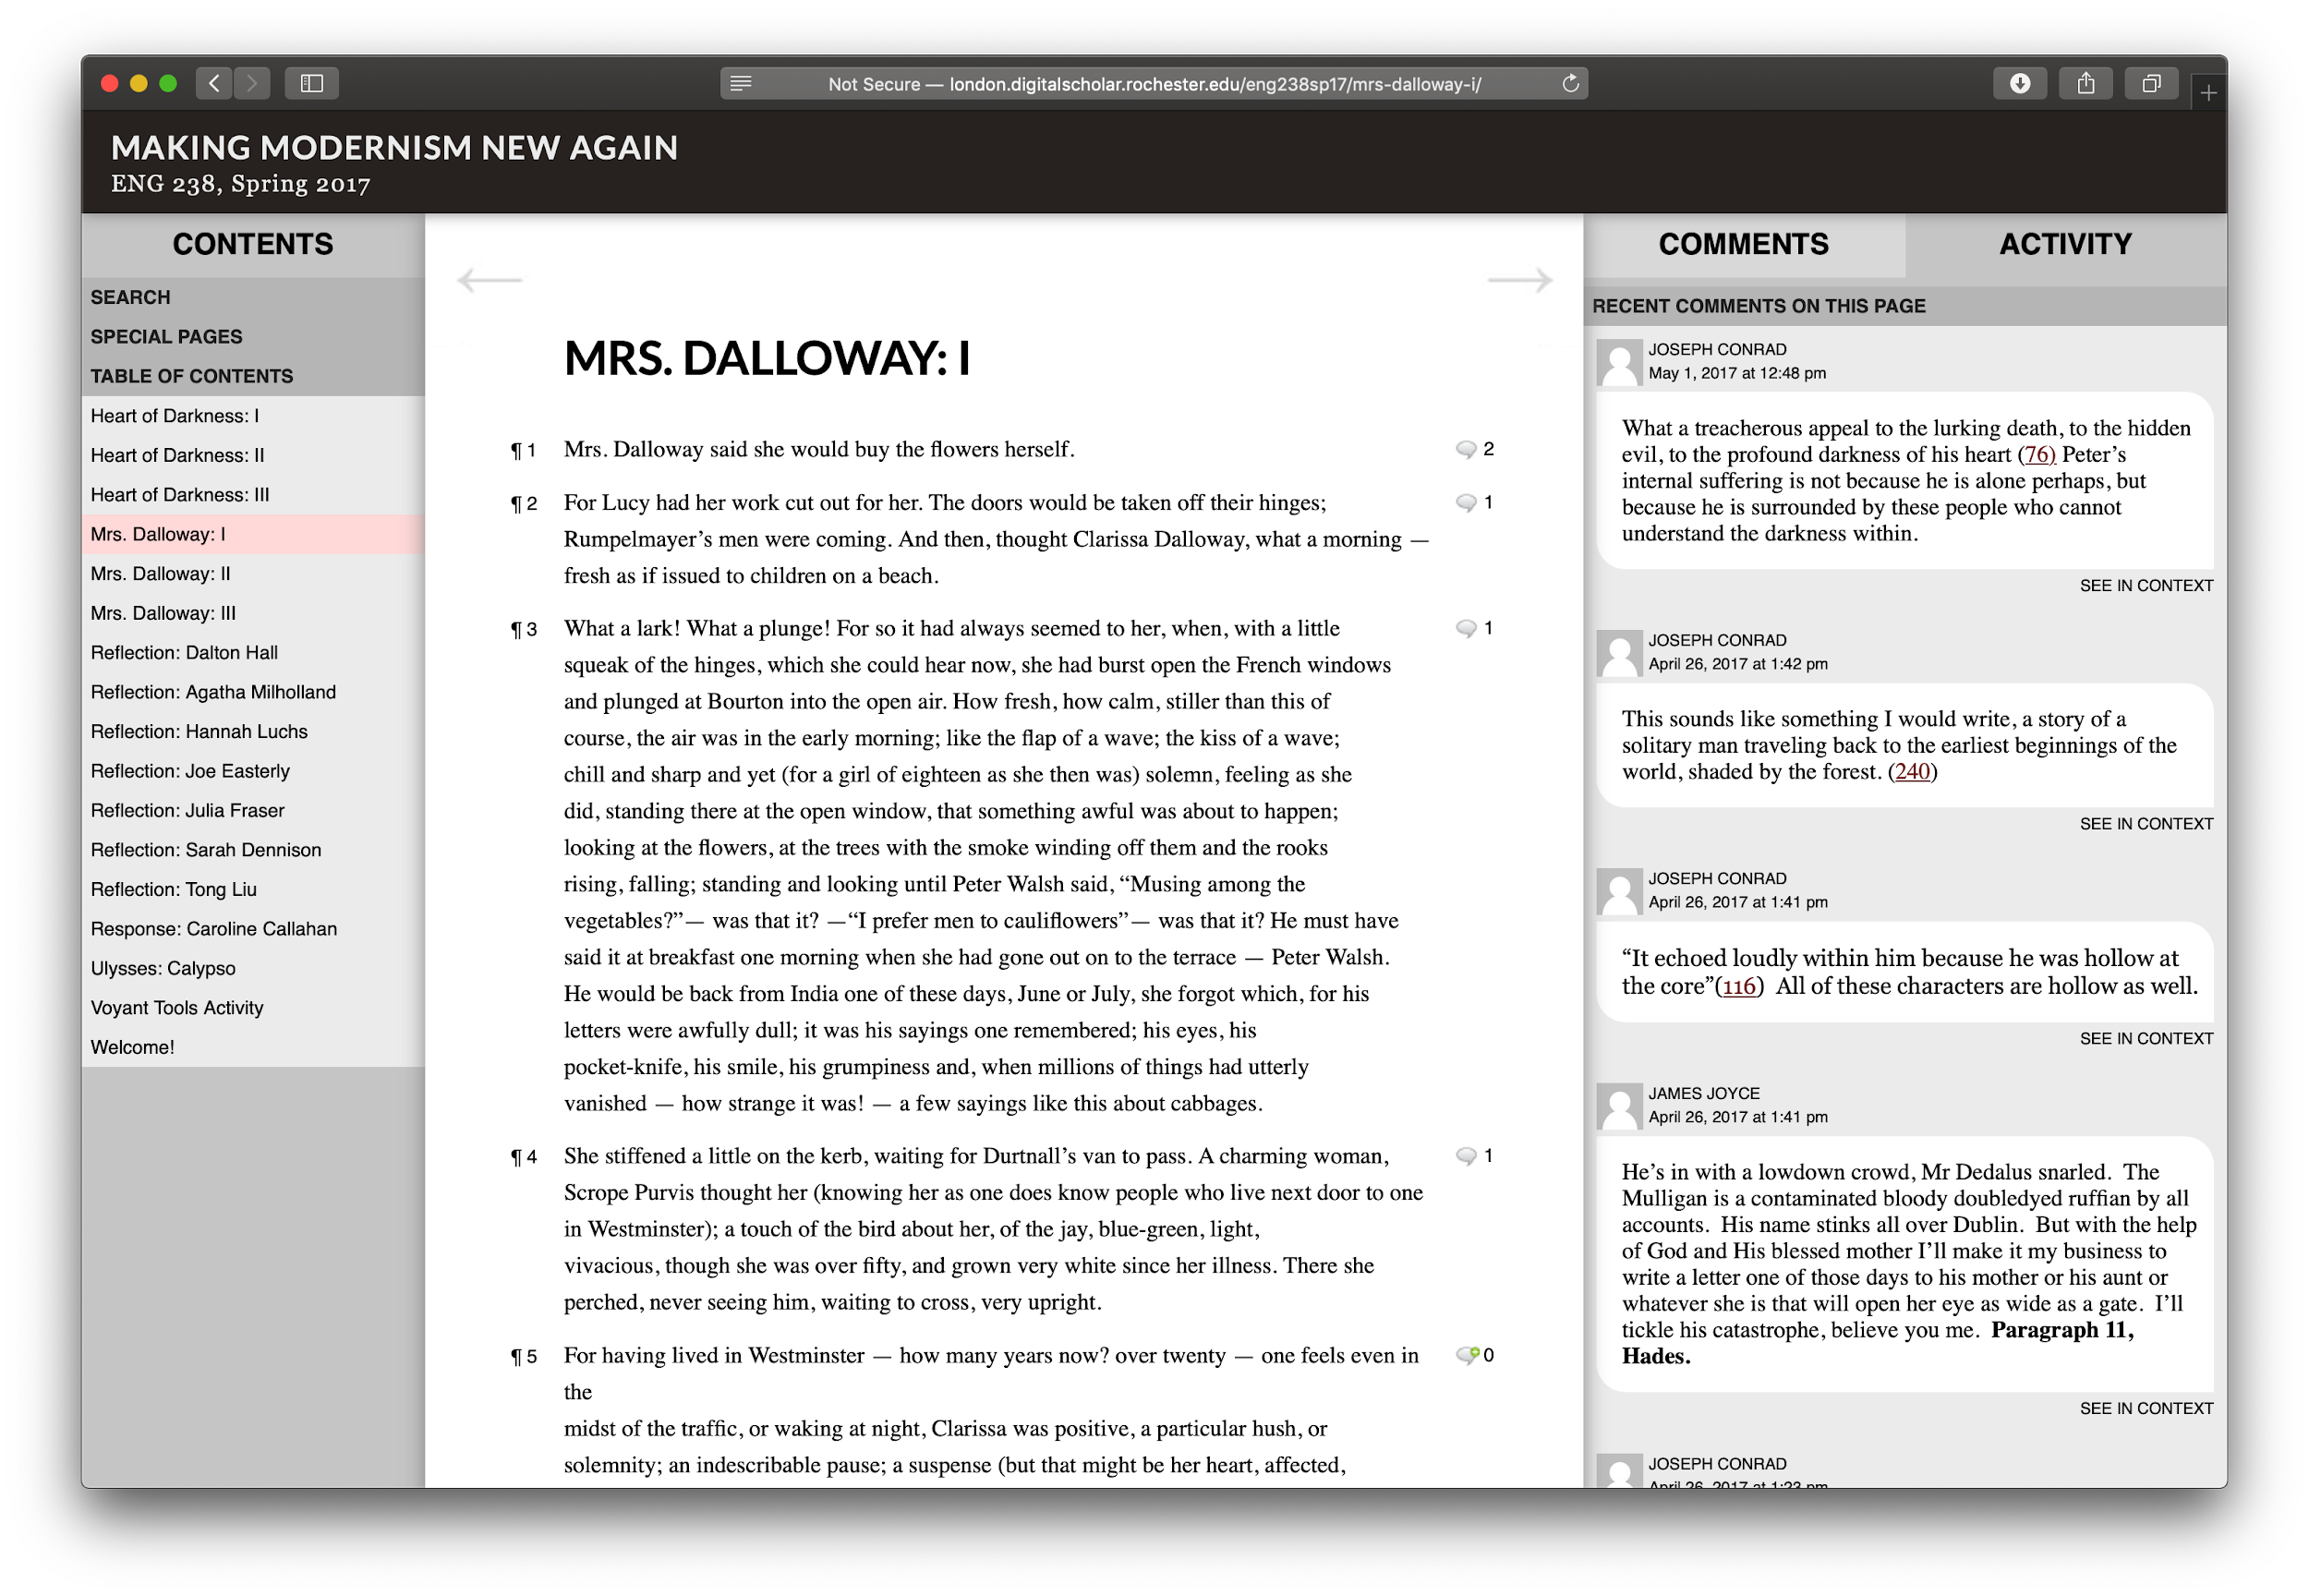 Contents menu on left, Mrs. Dalloway text in middle, comments thread on right